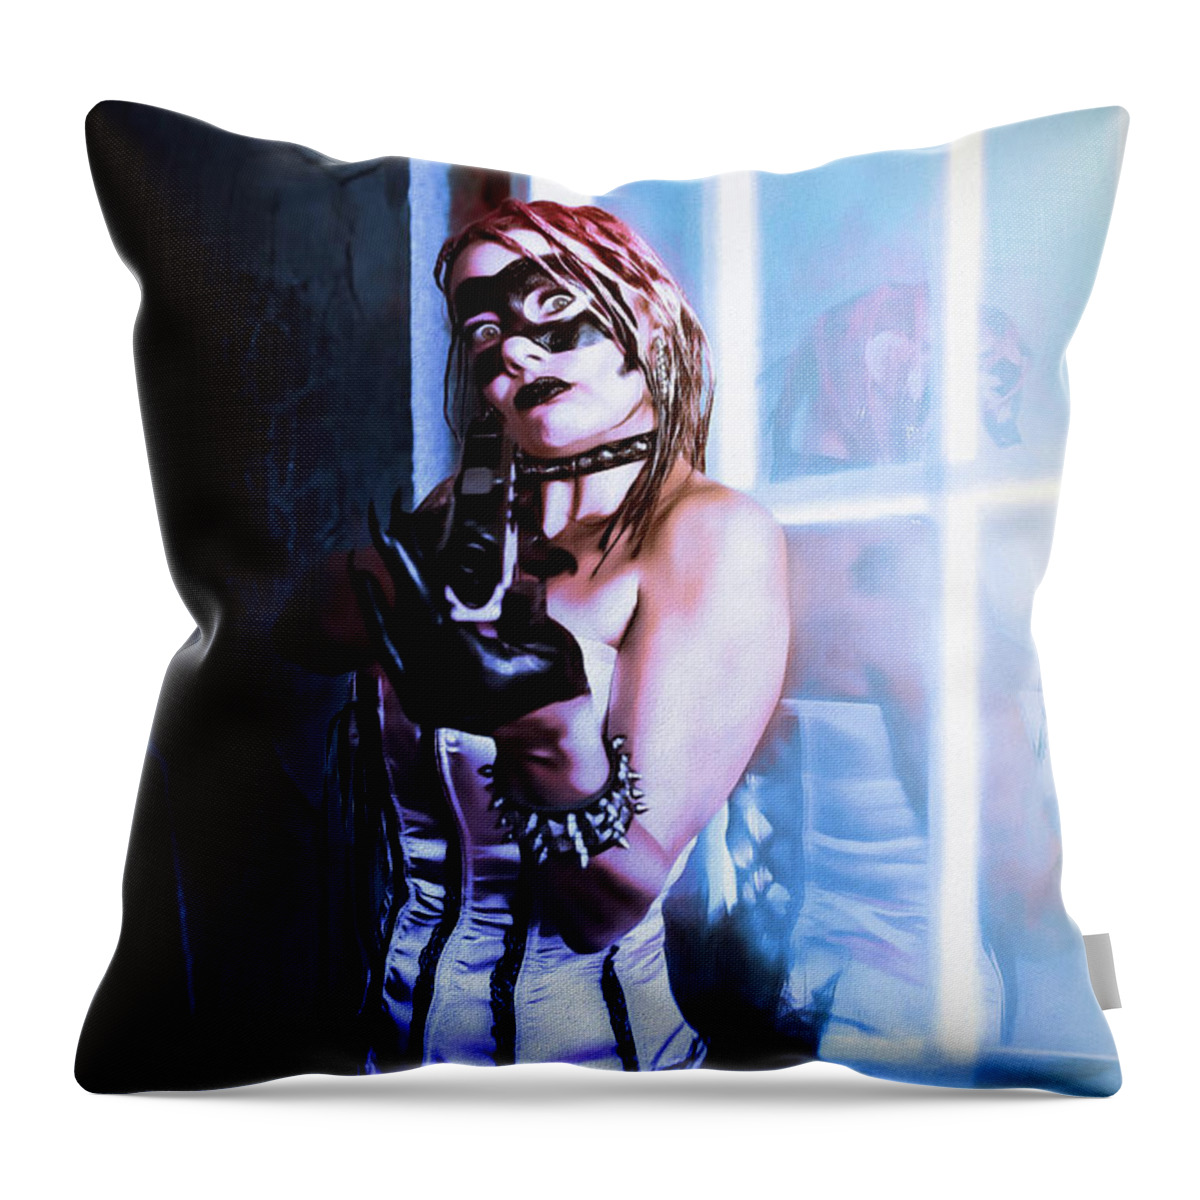 Dark Throw Pillow featuring the digital art Unhinged by Recreating Creation